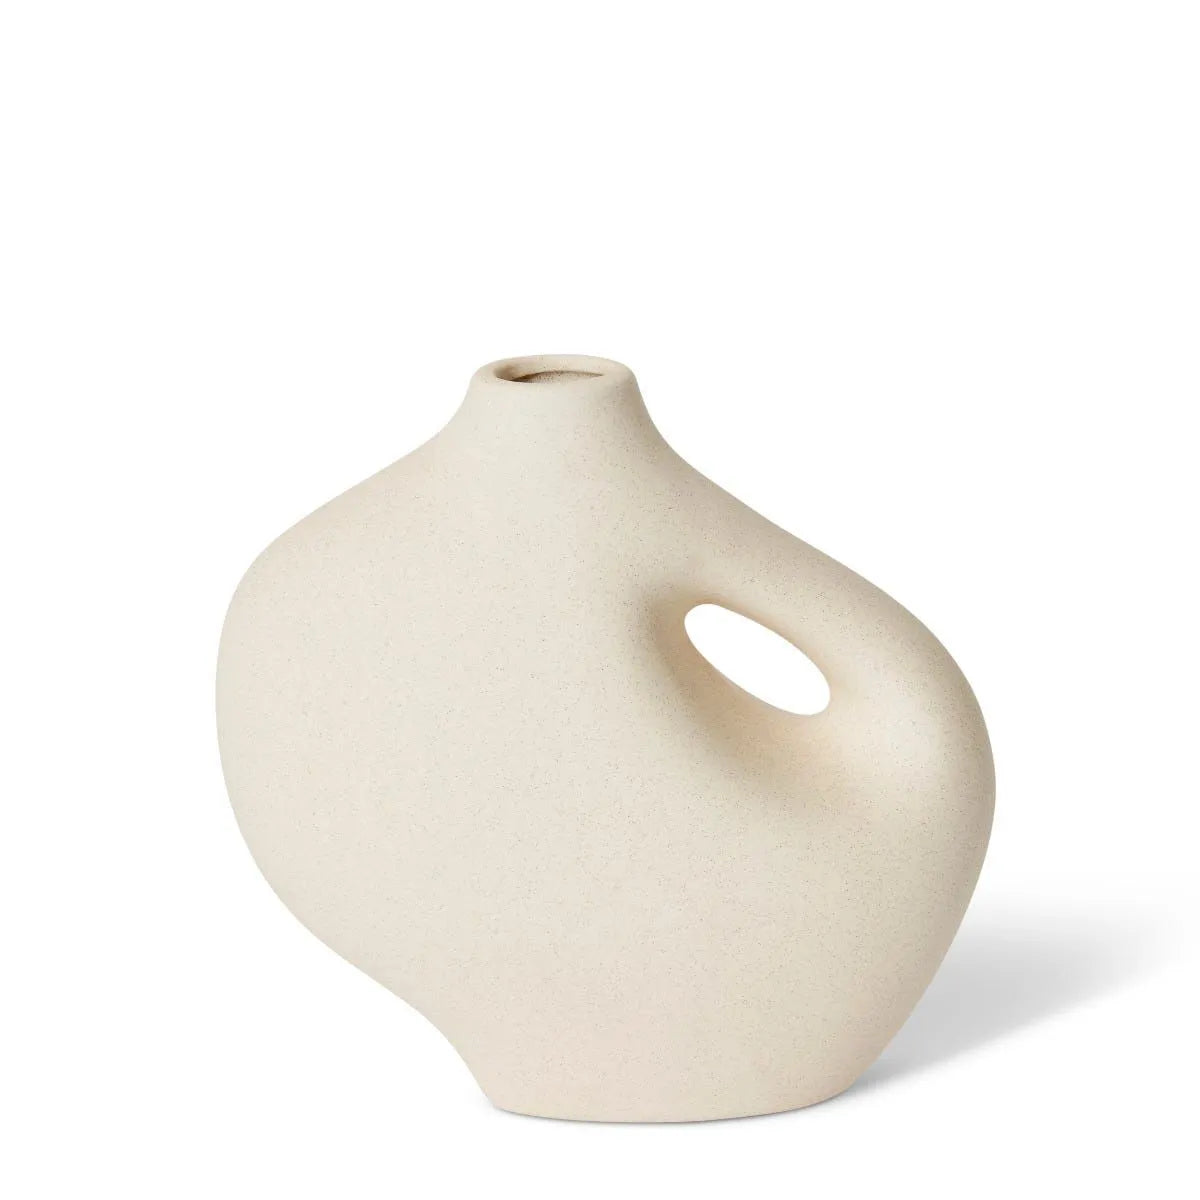 The Athena Vase is a unique and stylish ceramic vase, perfect for any home or office décor. Its eye-catching design and high-quality construction make it an ideal choice for creating a beautiful and elegant display.